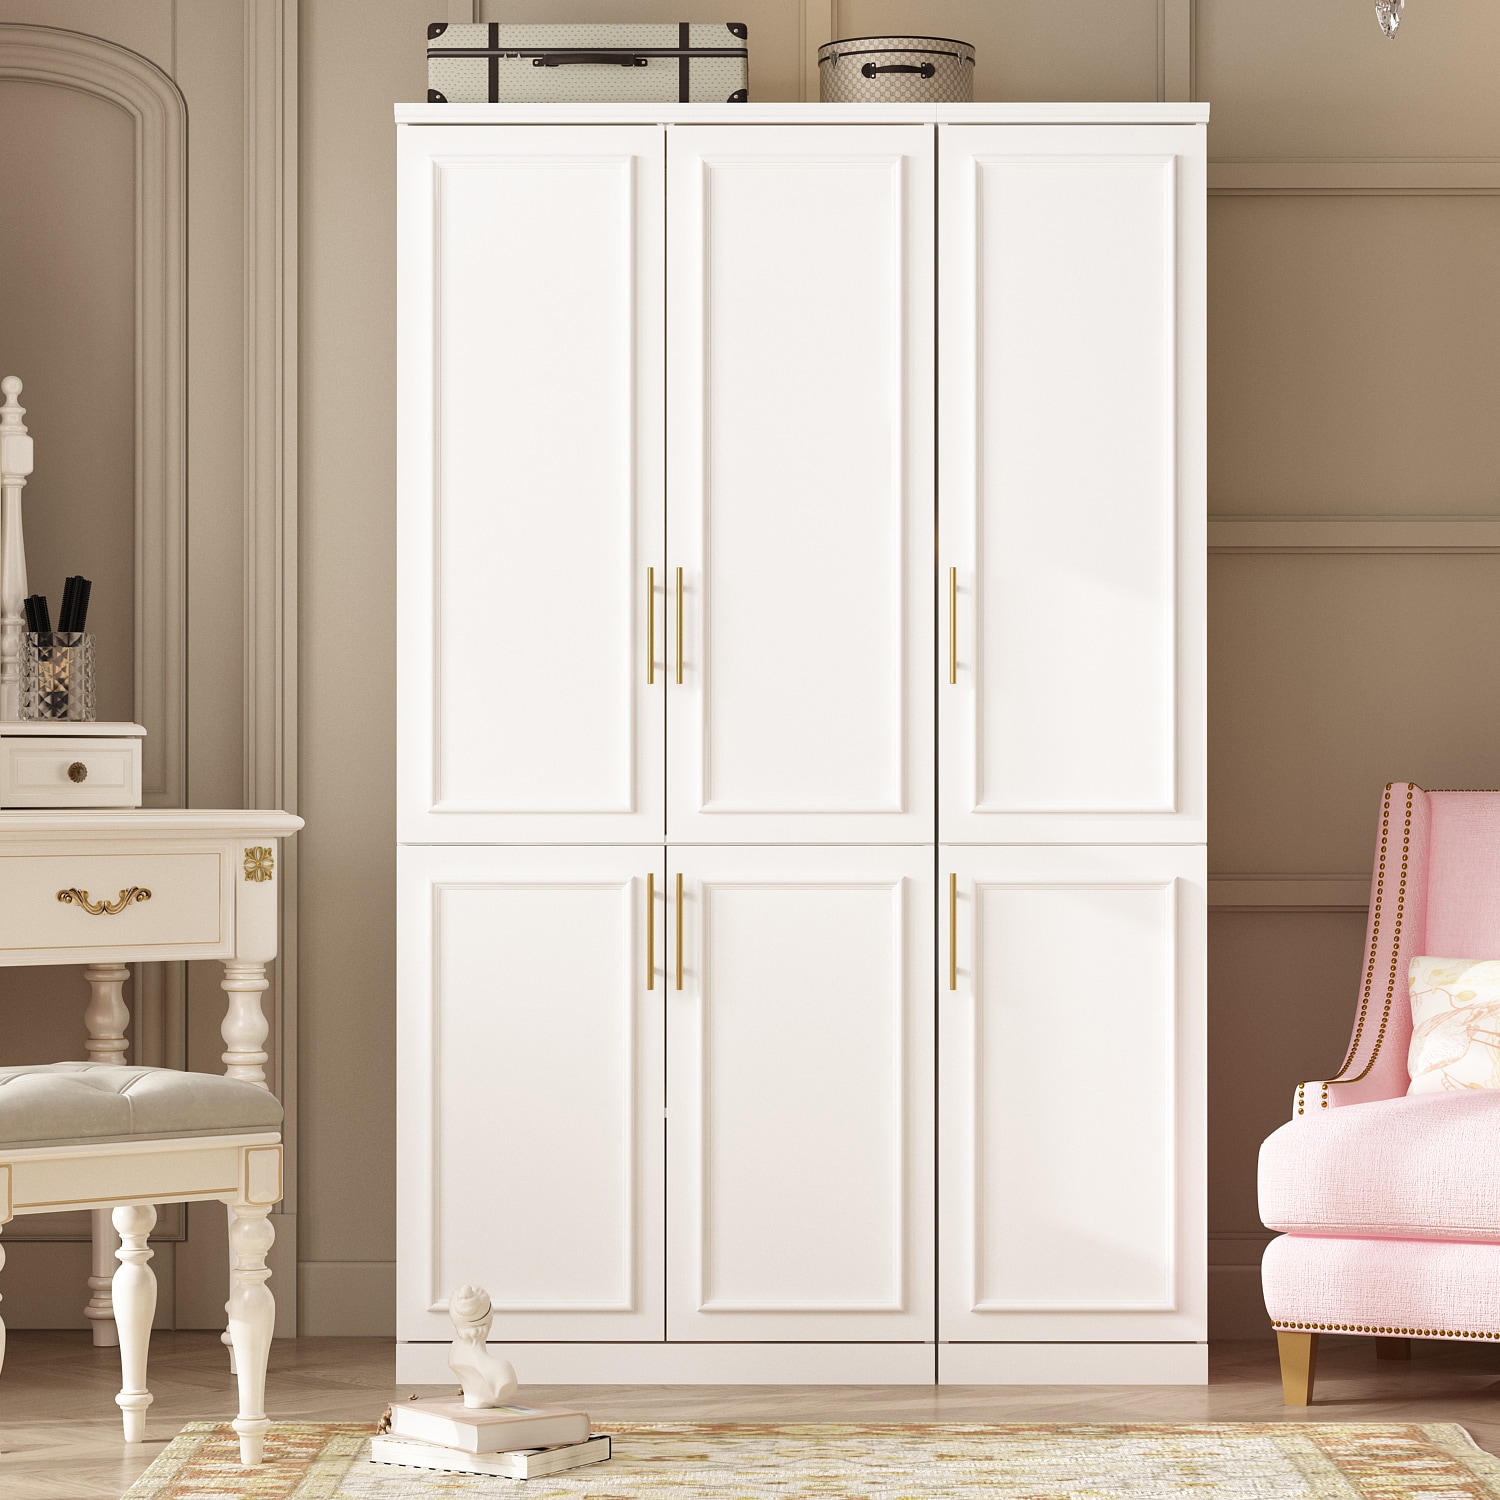 FUFU&GAGA White Armoire in the Armoires department at Lowes.com